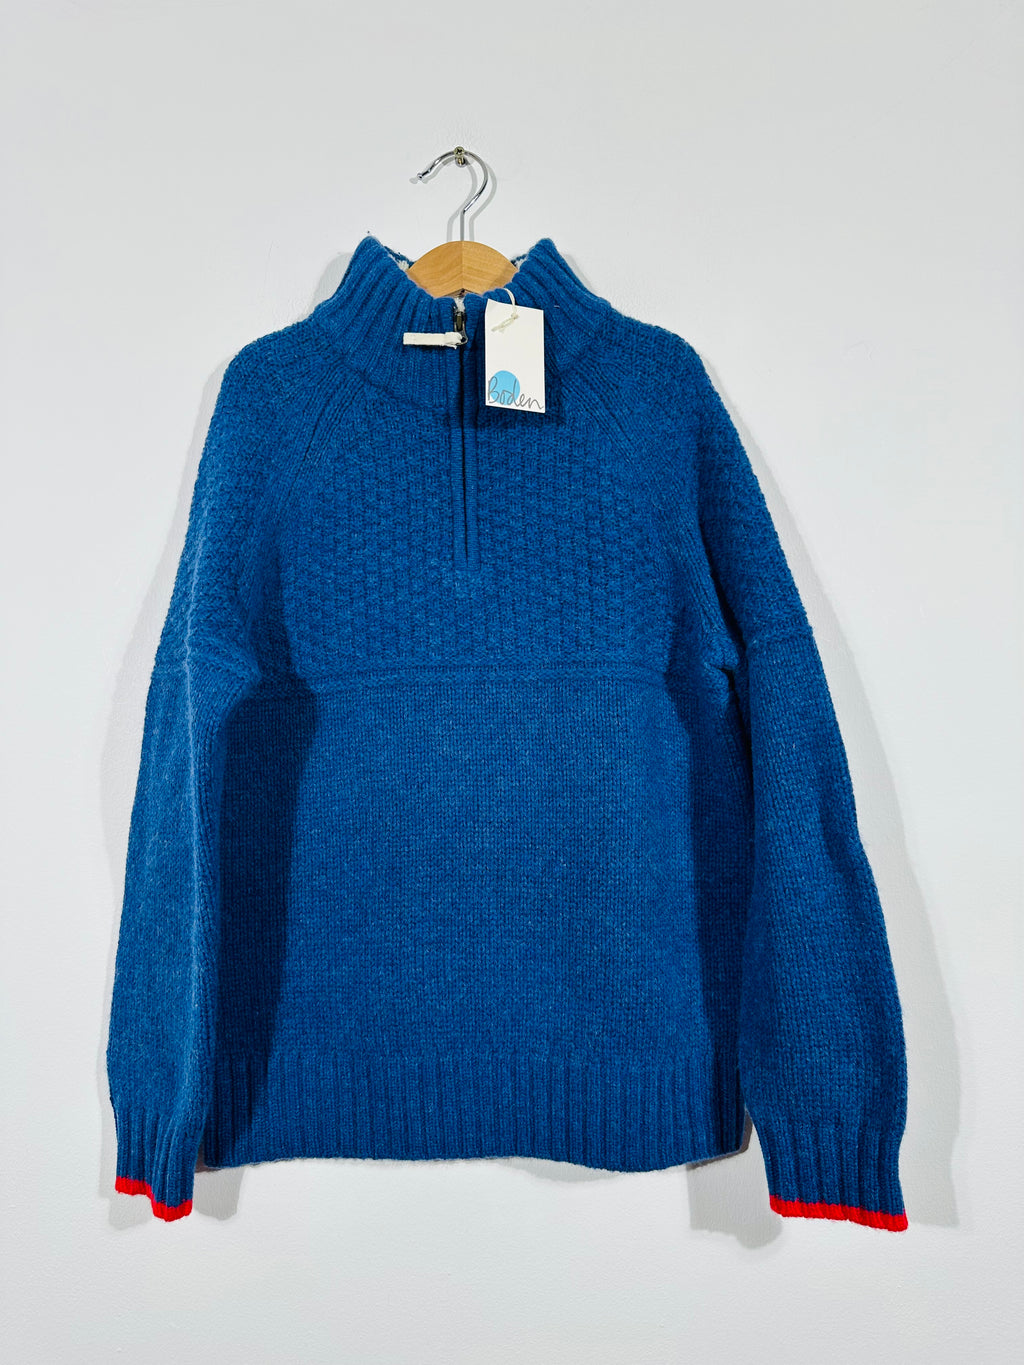 NEW Blue Knitted Wool Jumper (8-9 Years)